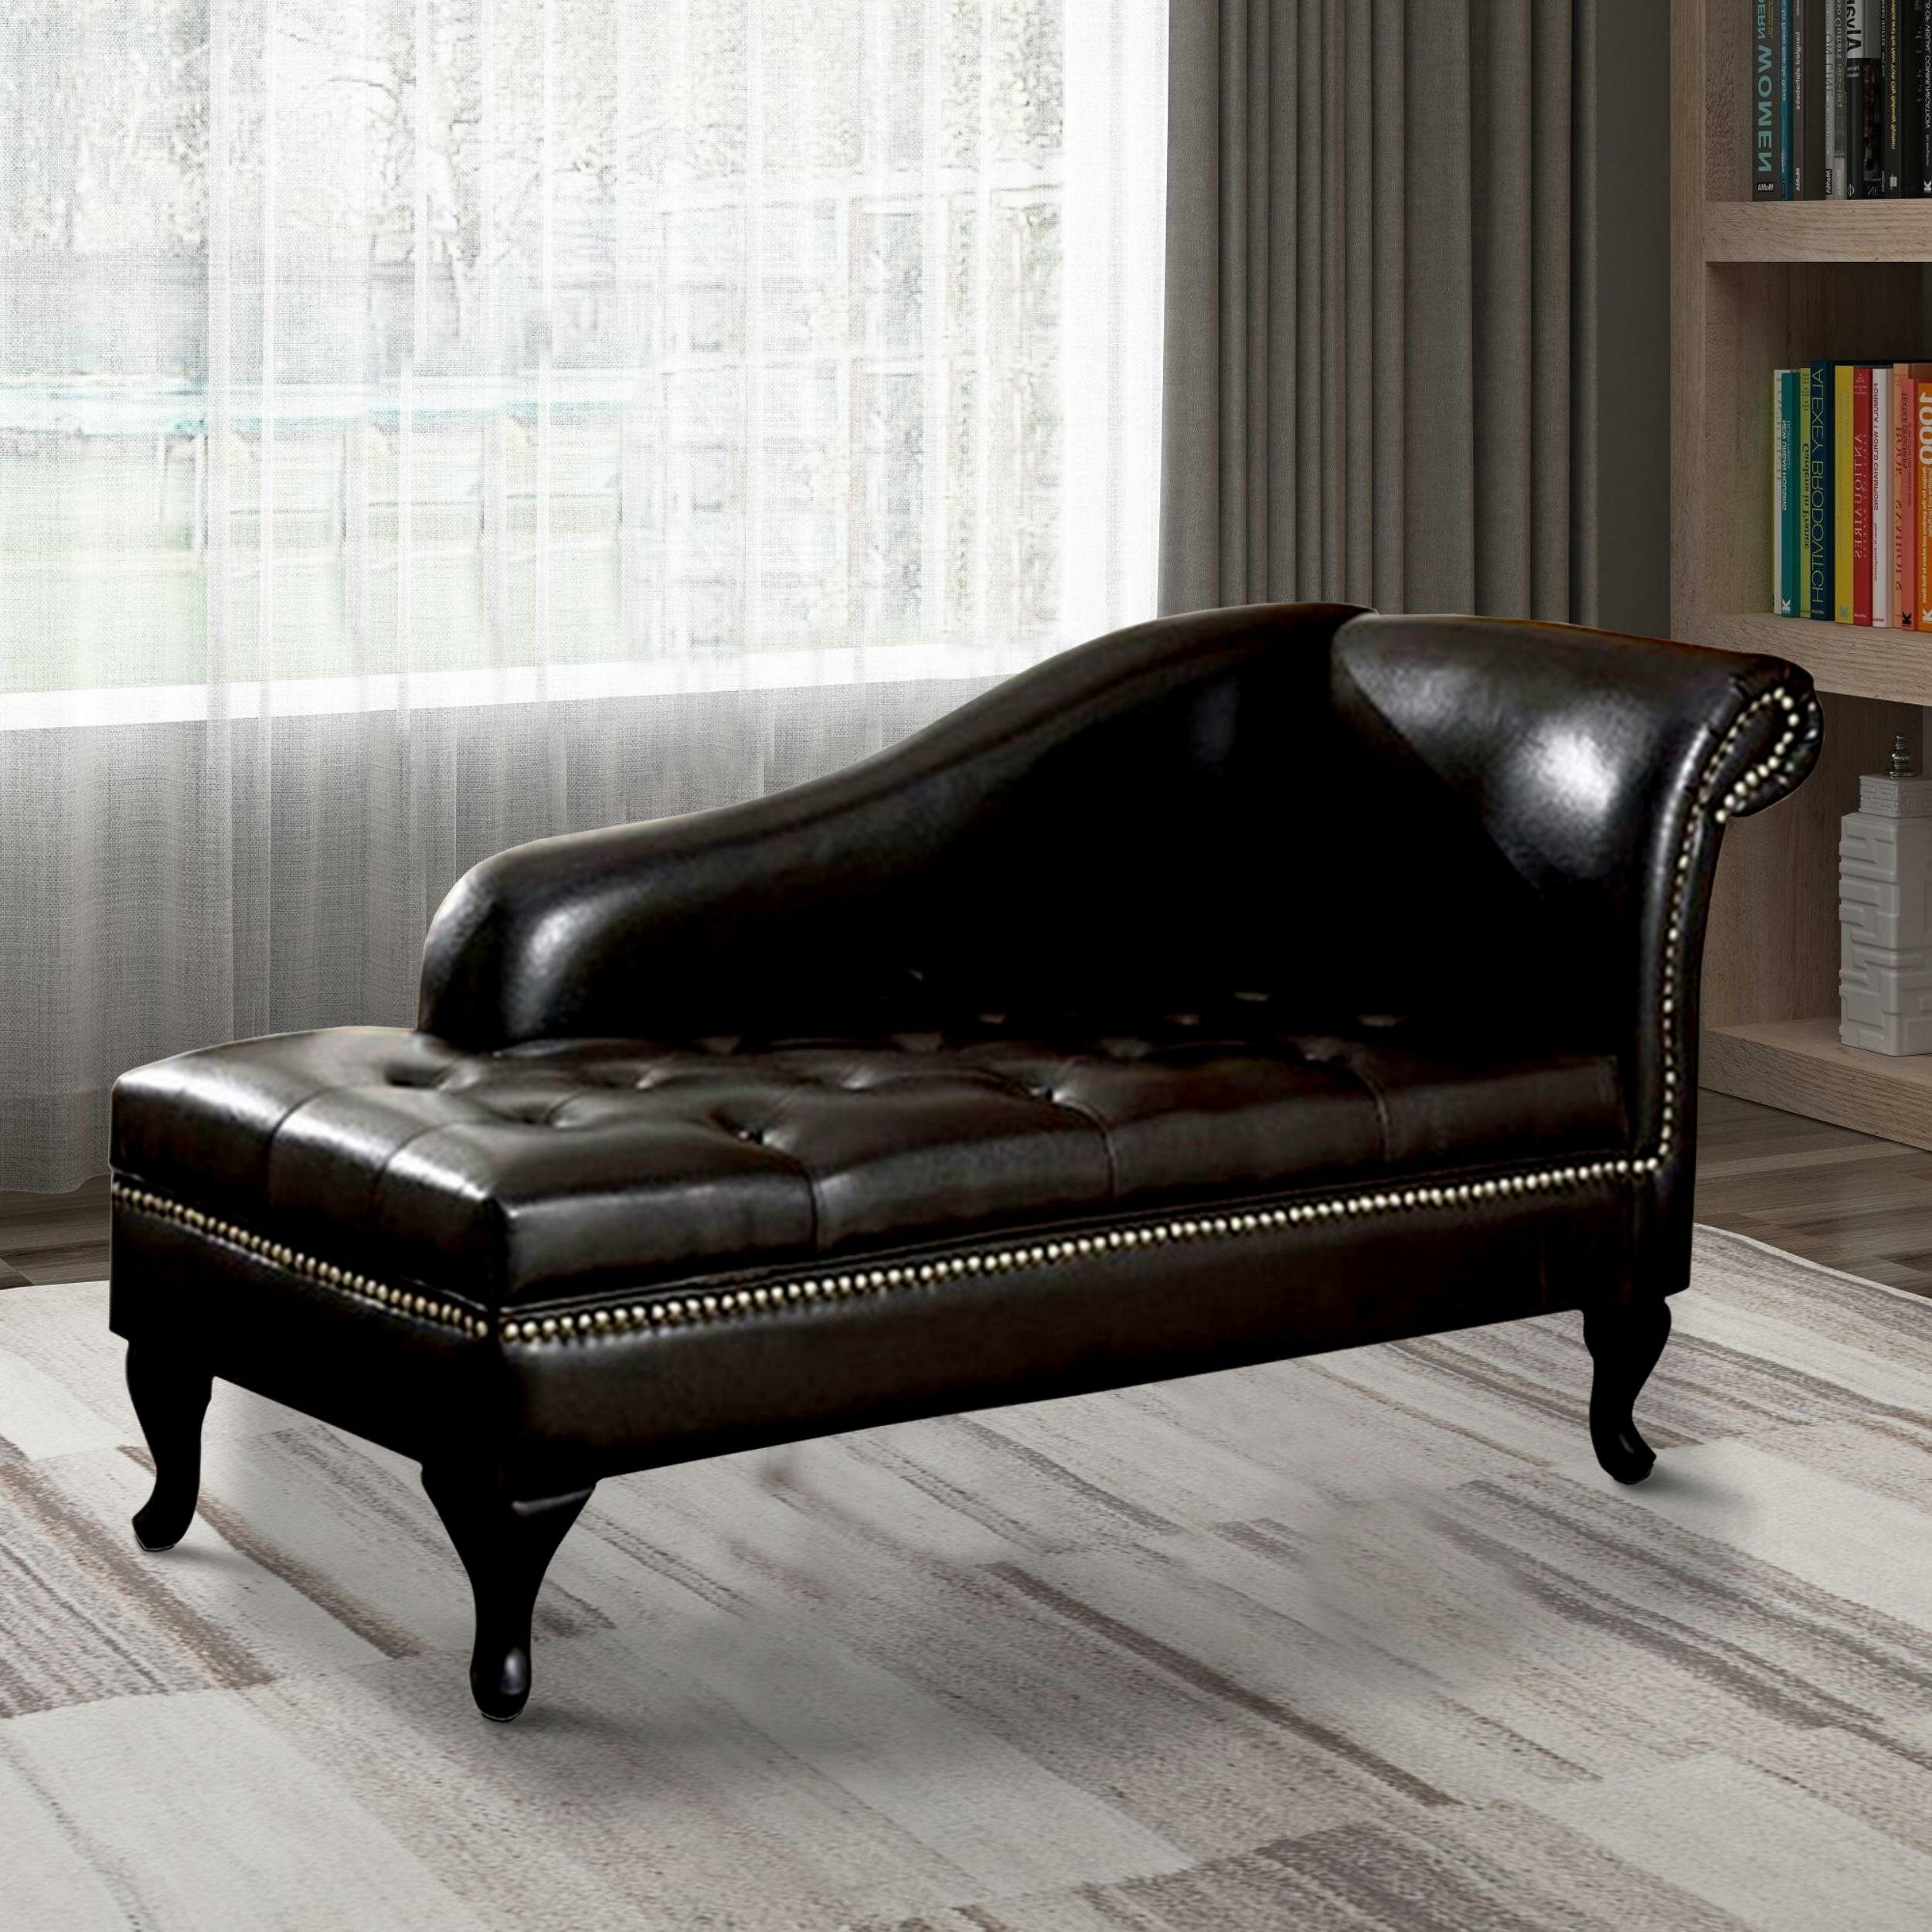 Balster Chaise Lounge Leather Match